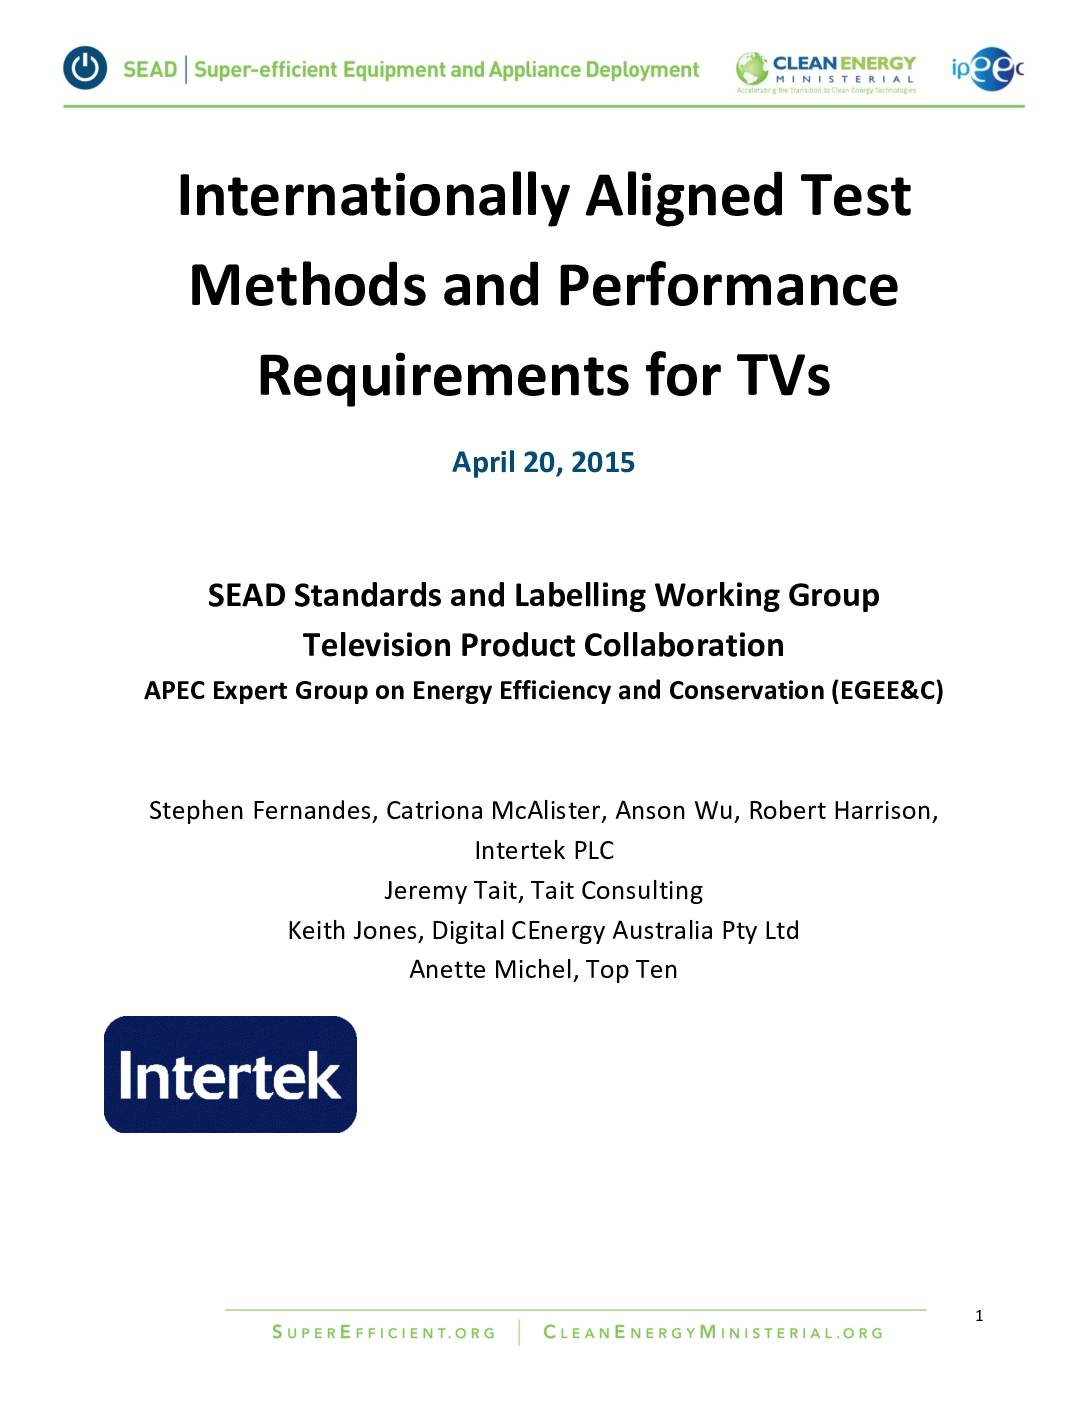 Internationally Aligned Test Methods and Performance Requirements for TVs